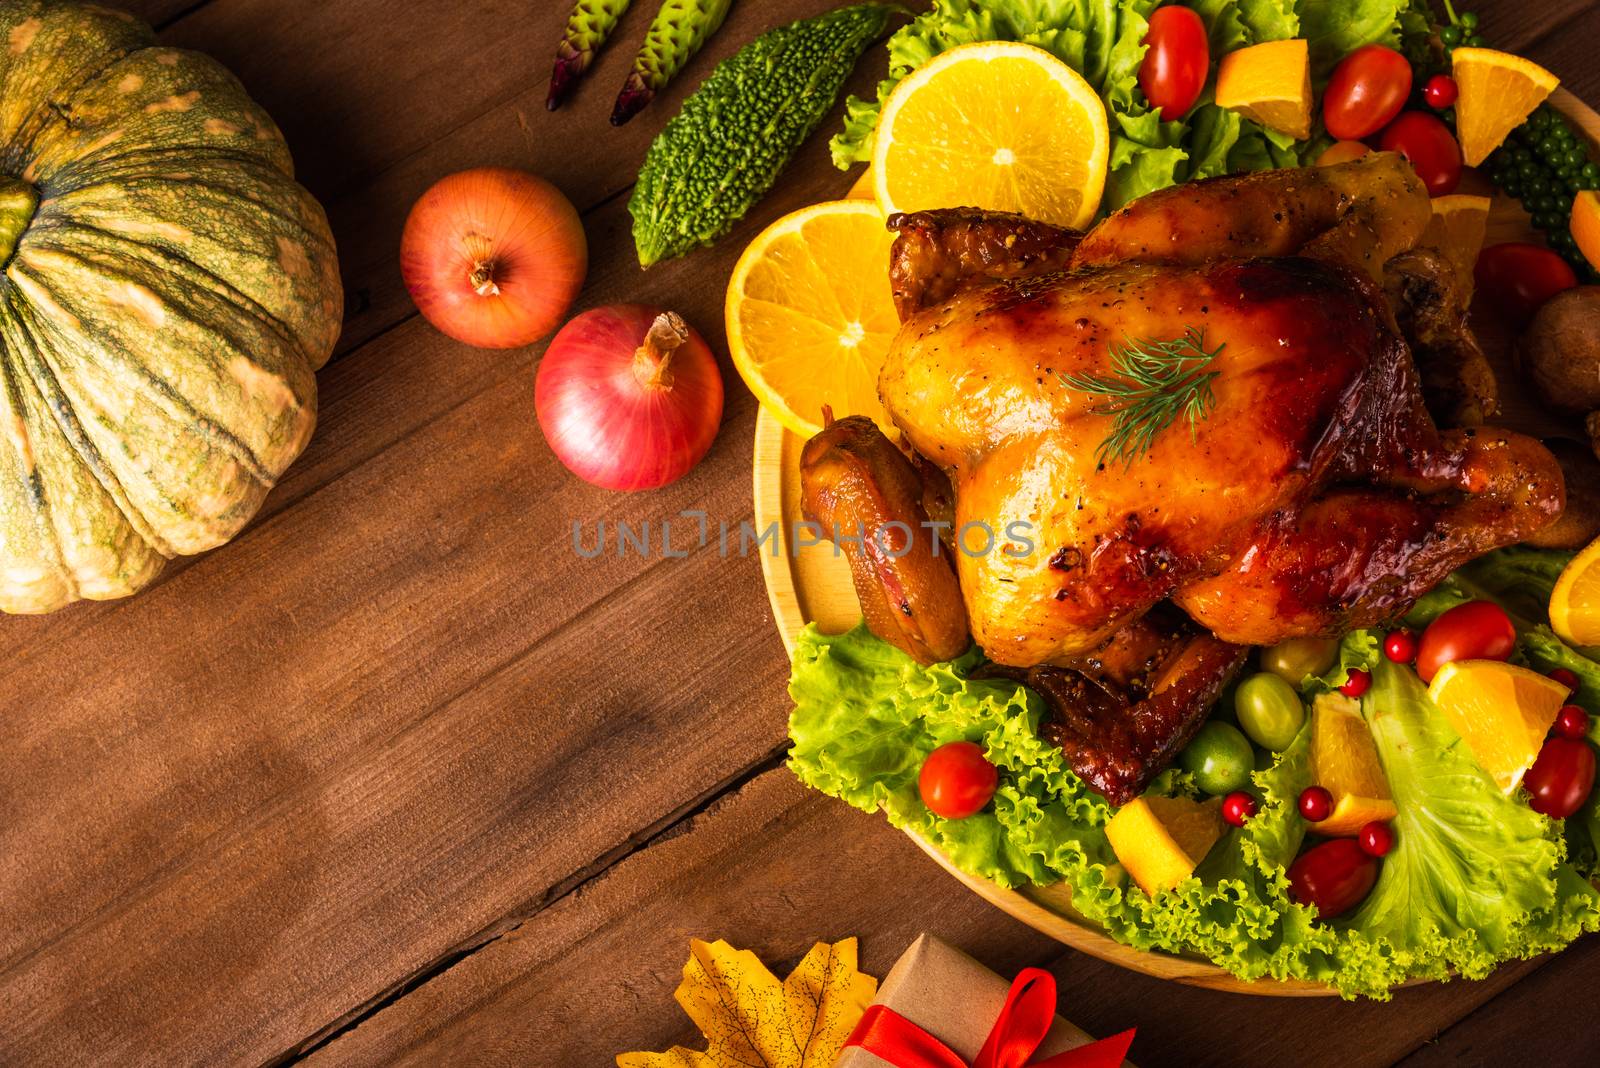 Thanksgiving roasted turkey or chicken and vegetables, Top view Christmas dinner feast food decoration traditional homemade on wooden table background, Happy thanksgiving day of holiday concept